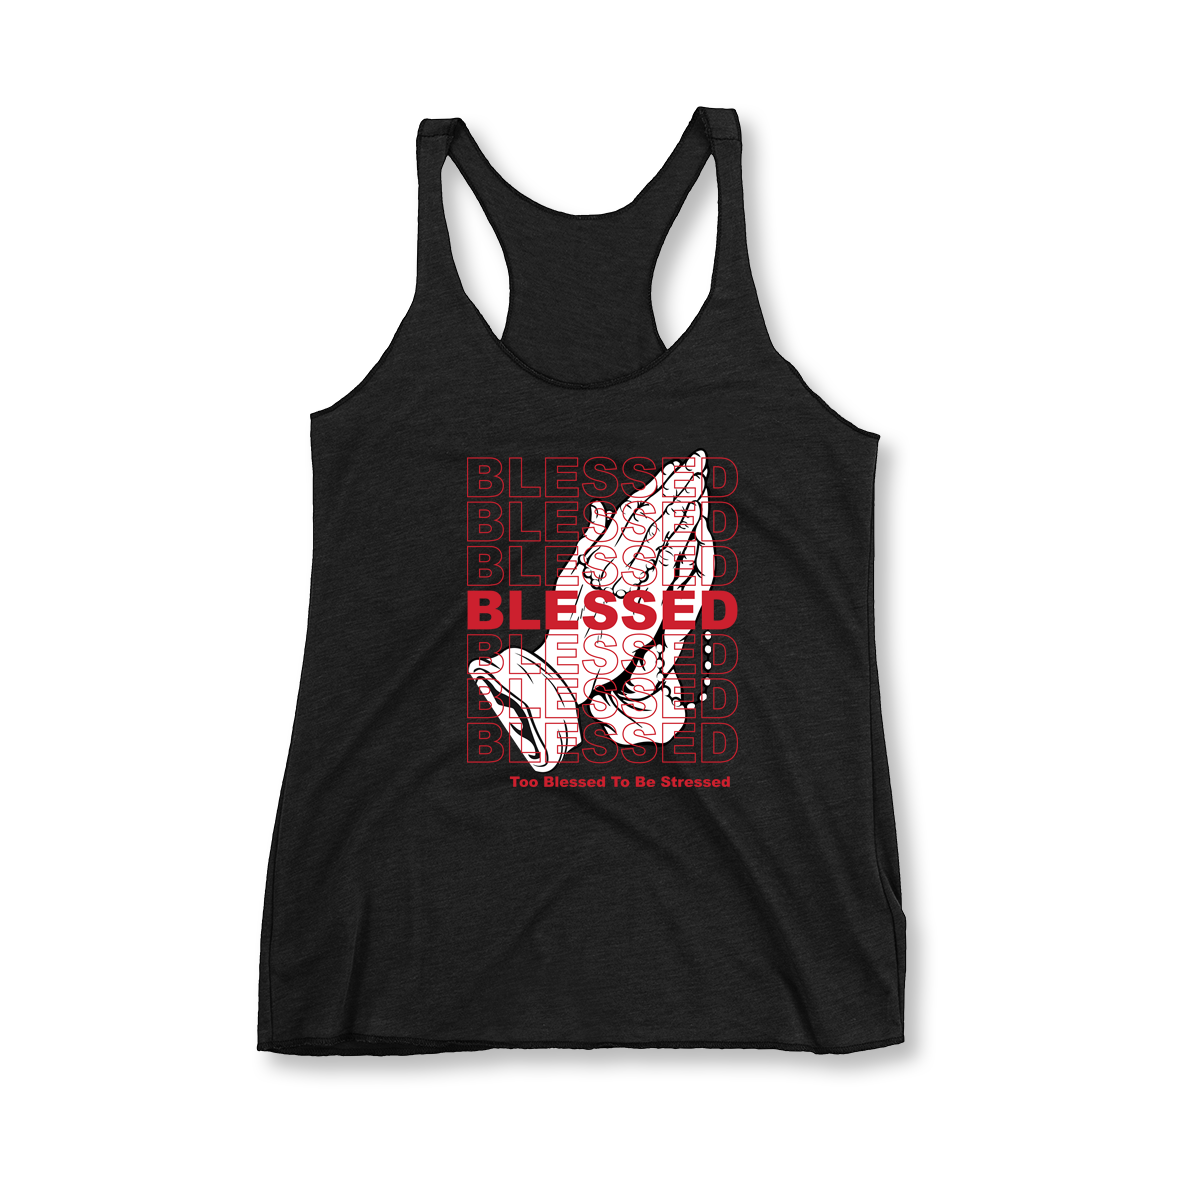 Blessed in Red Women's Racerback Tank